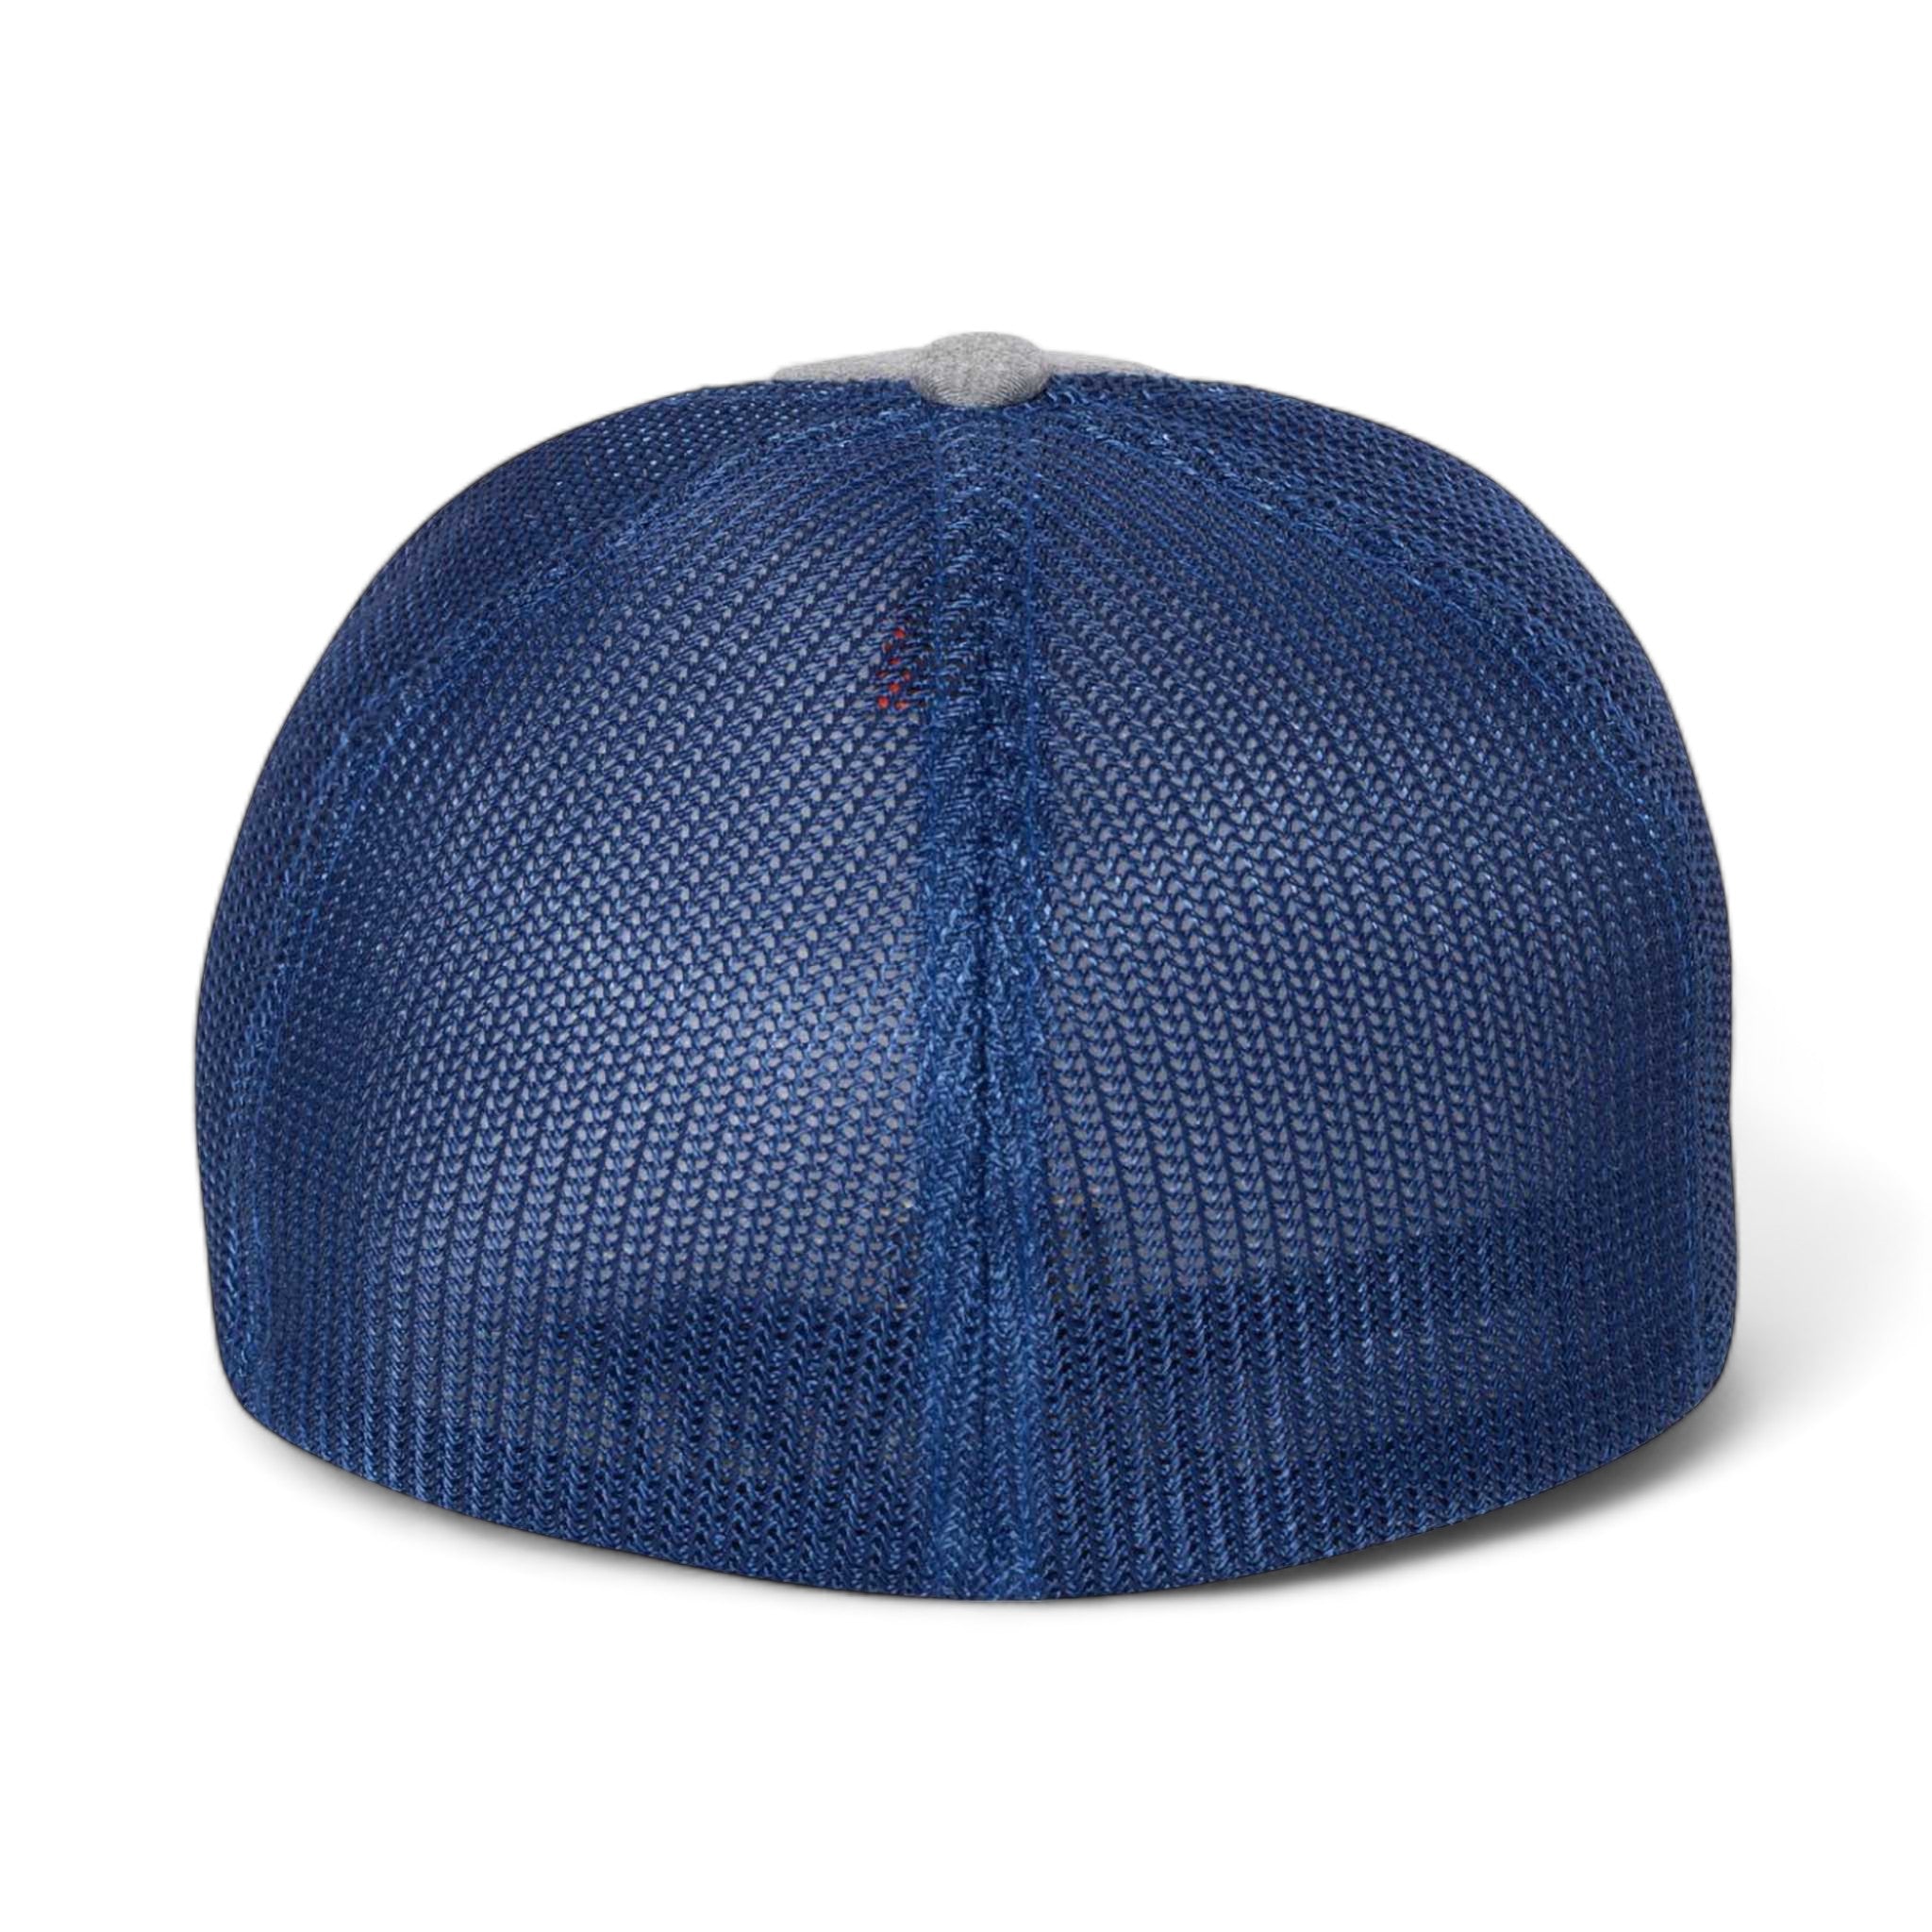 Back view of Flexfit 6311 custom hat in heather grey and royal